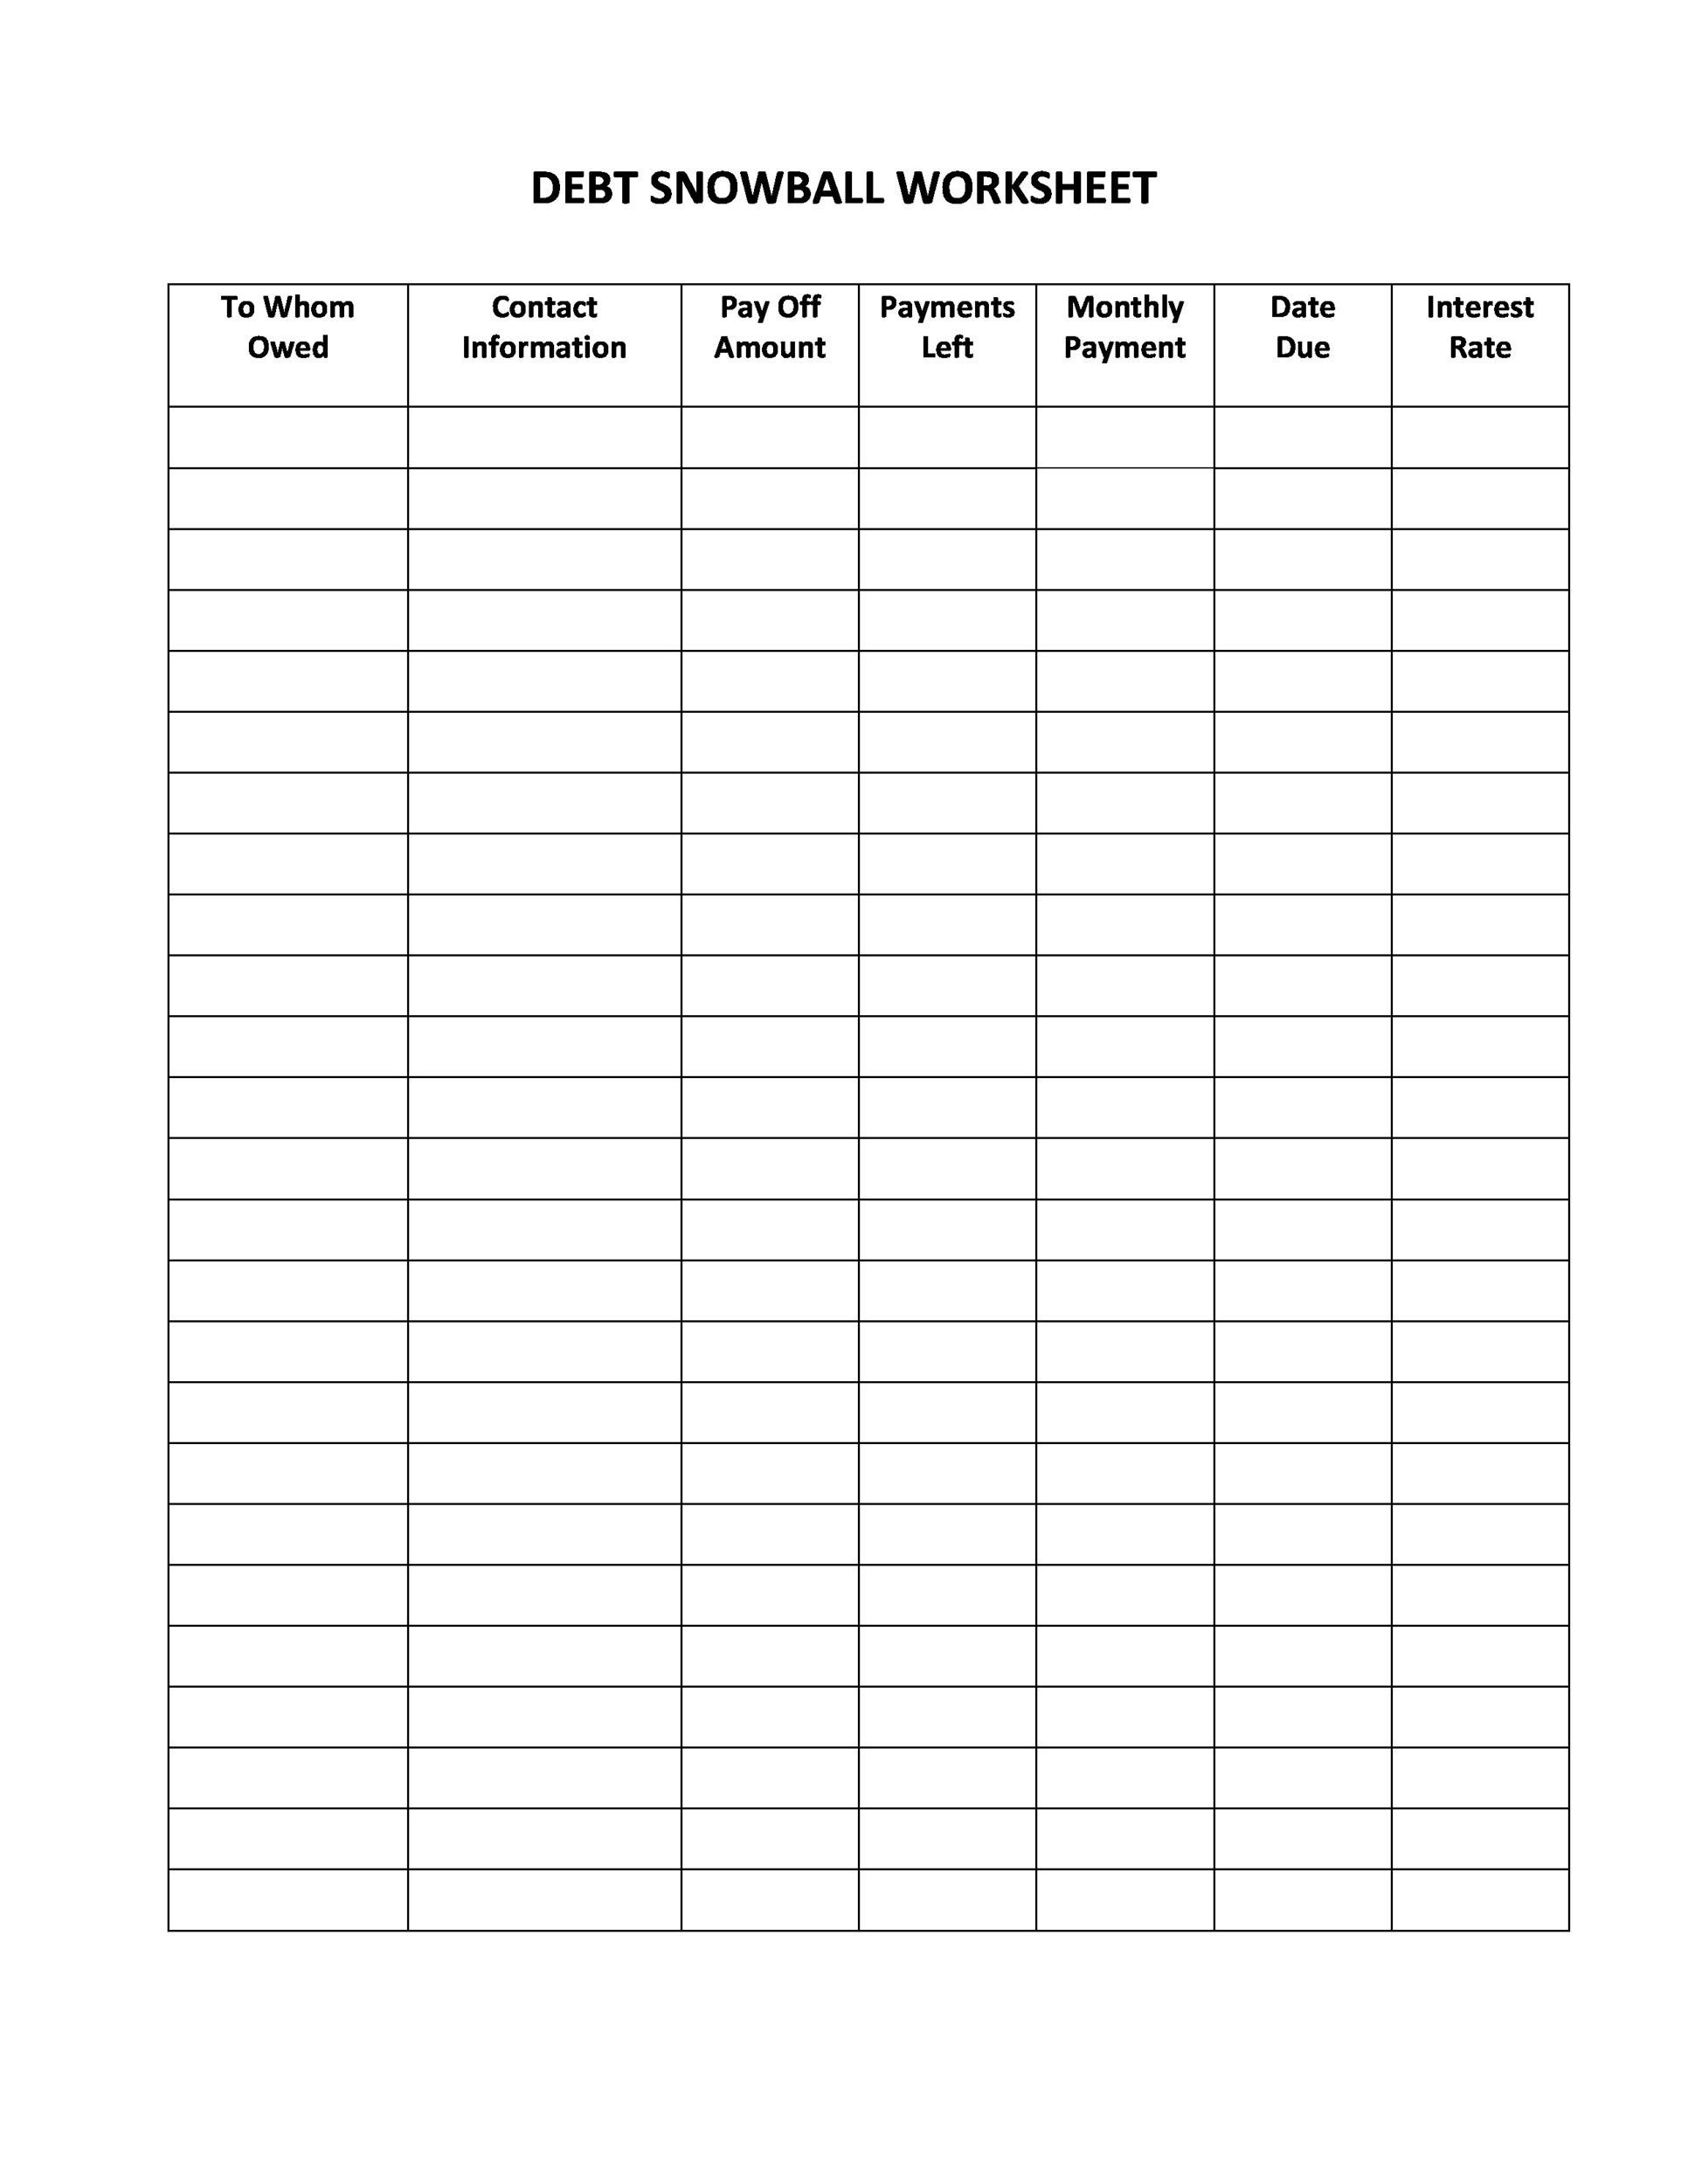 38 Debt Snowball Spreadsheets, Forms &amp;amp; Calculators ❄❄❄ within Debt Snowball Worksheet Free Printable